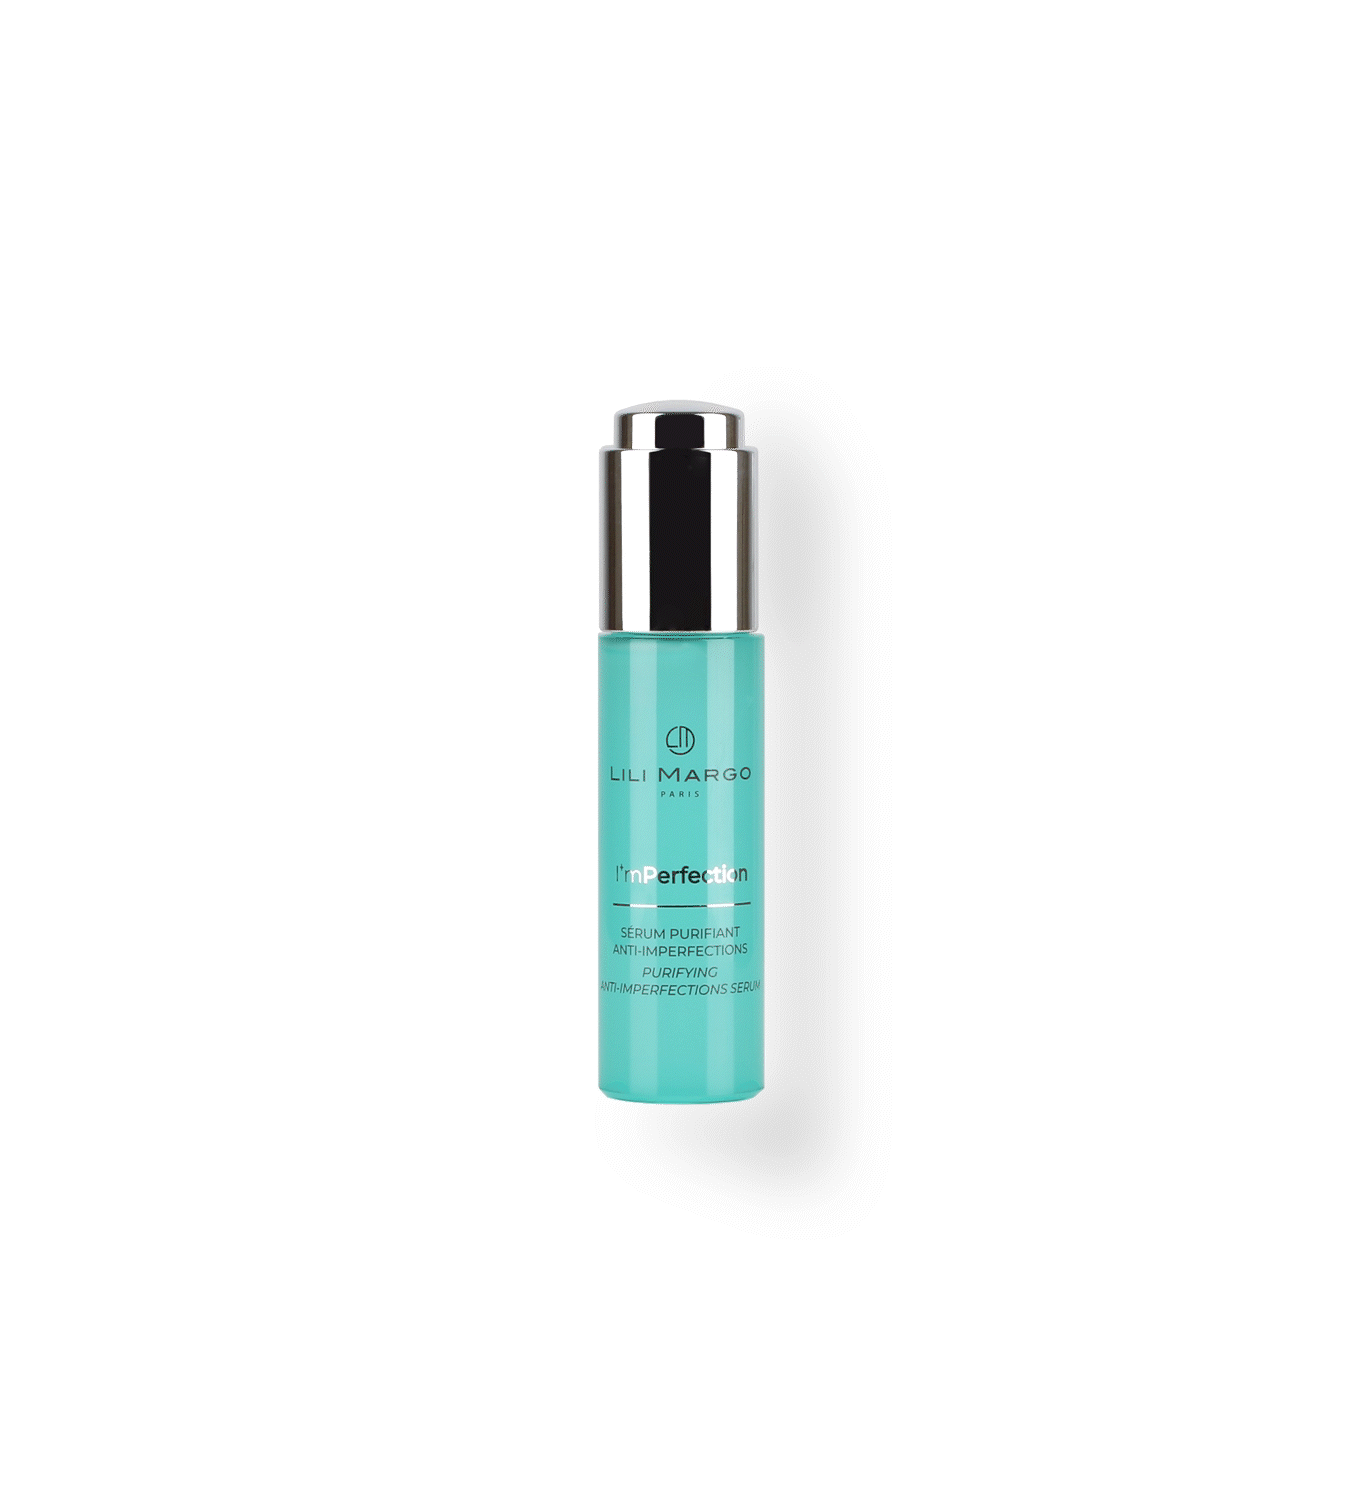 Purifying Anti-Imperfections Serum